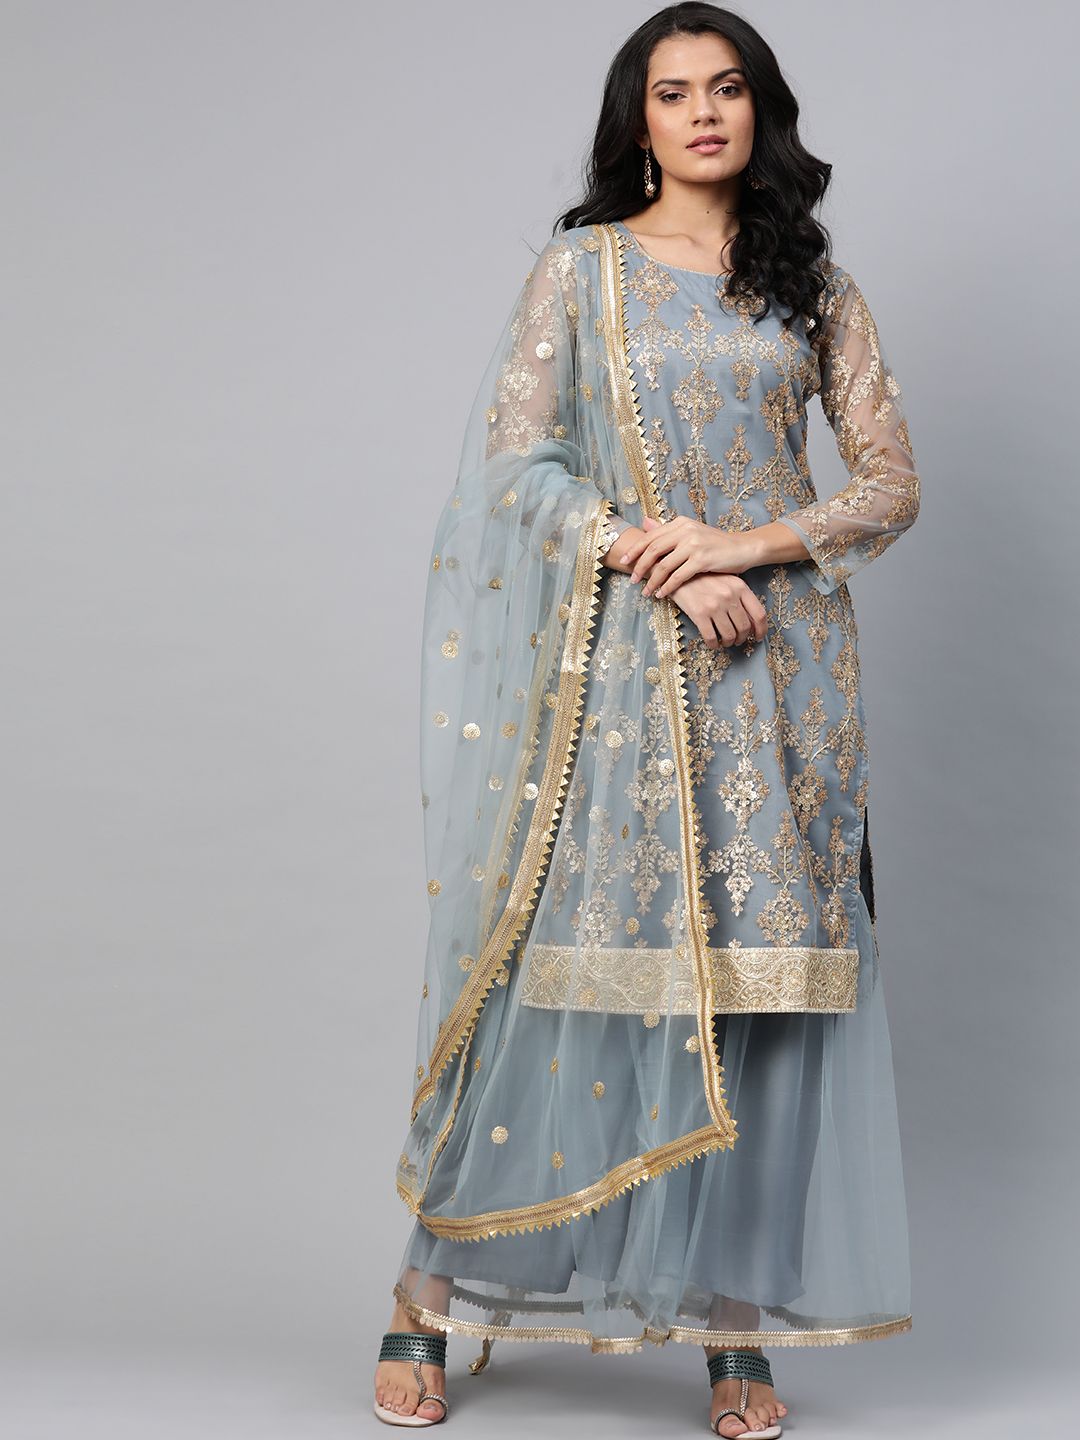 Readiprint Fashions Women Grey & Golden Embroidered Semi-Stitched Dress Material Price in India